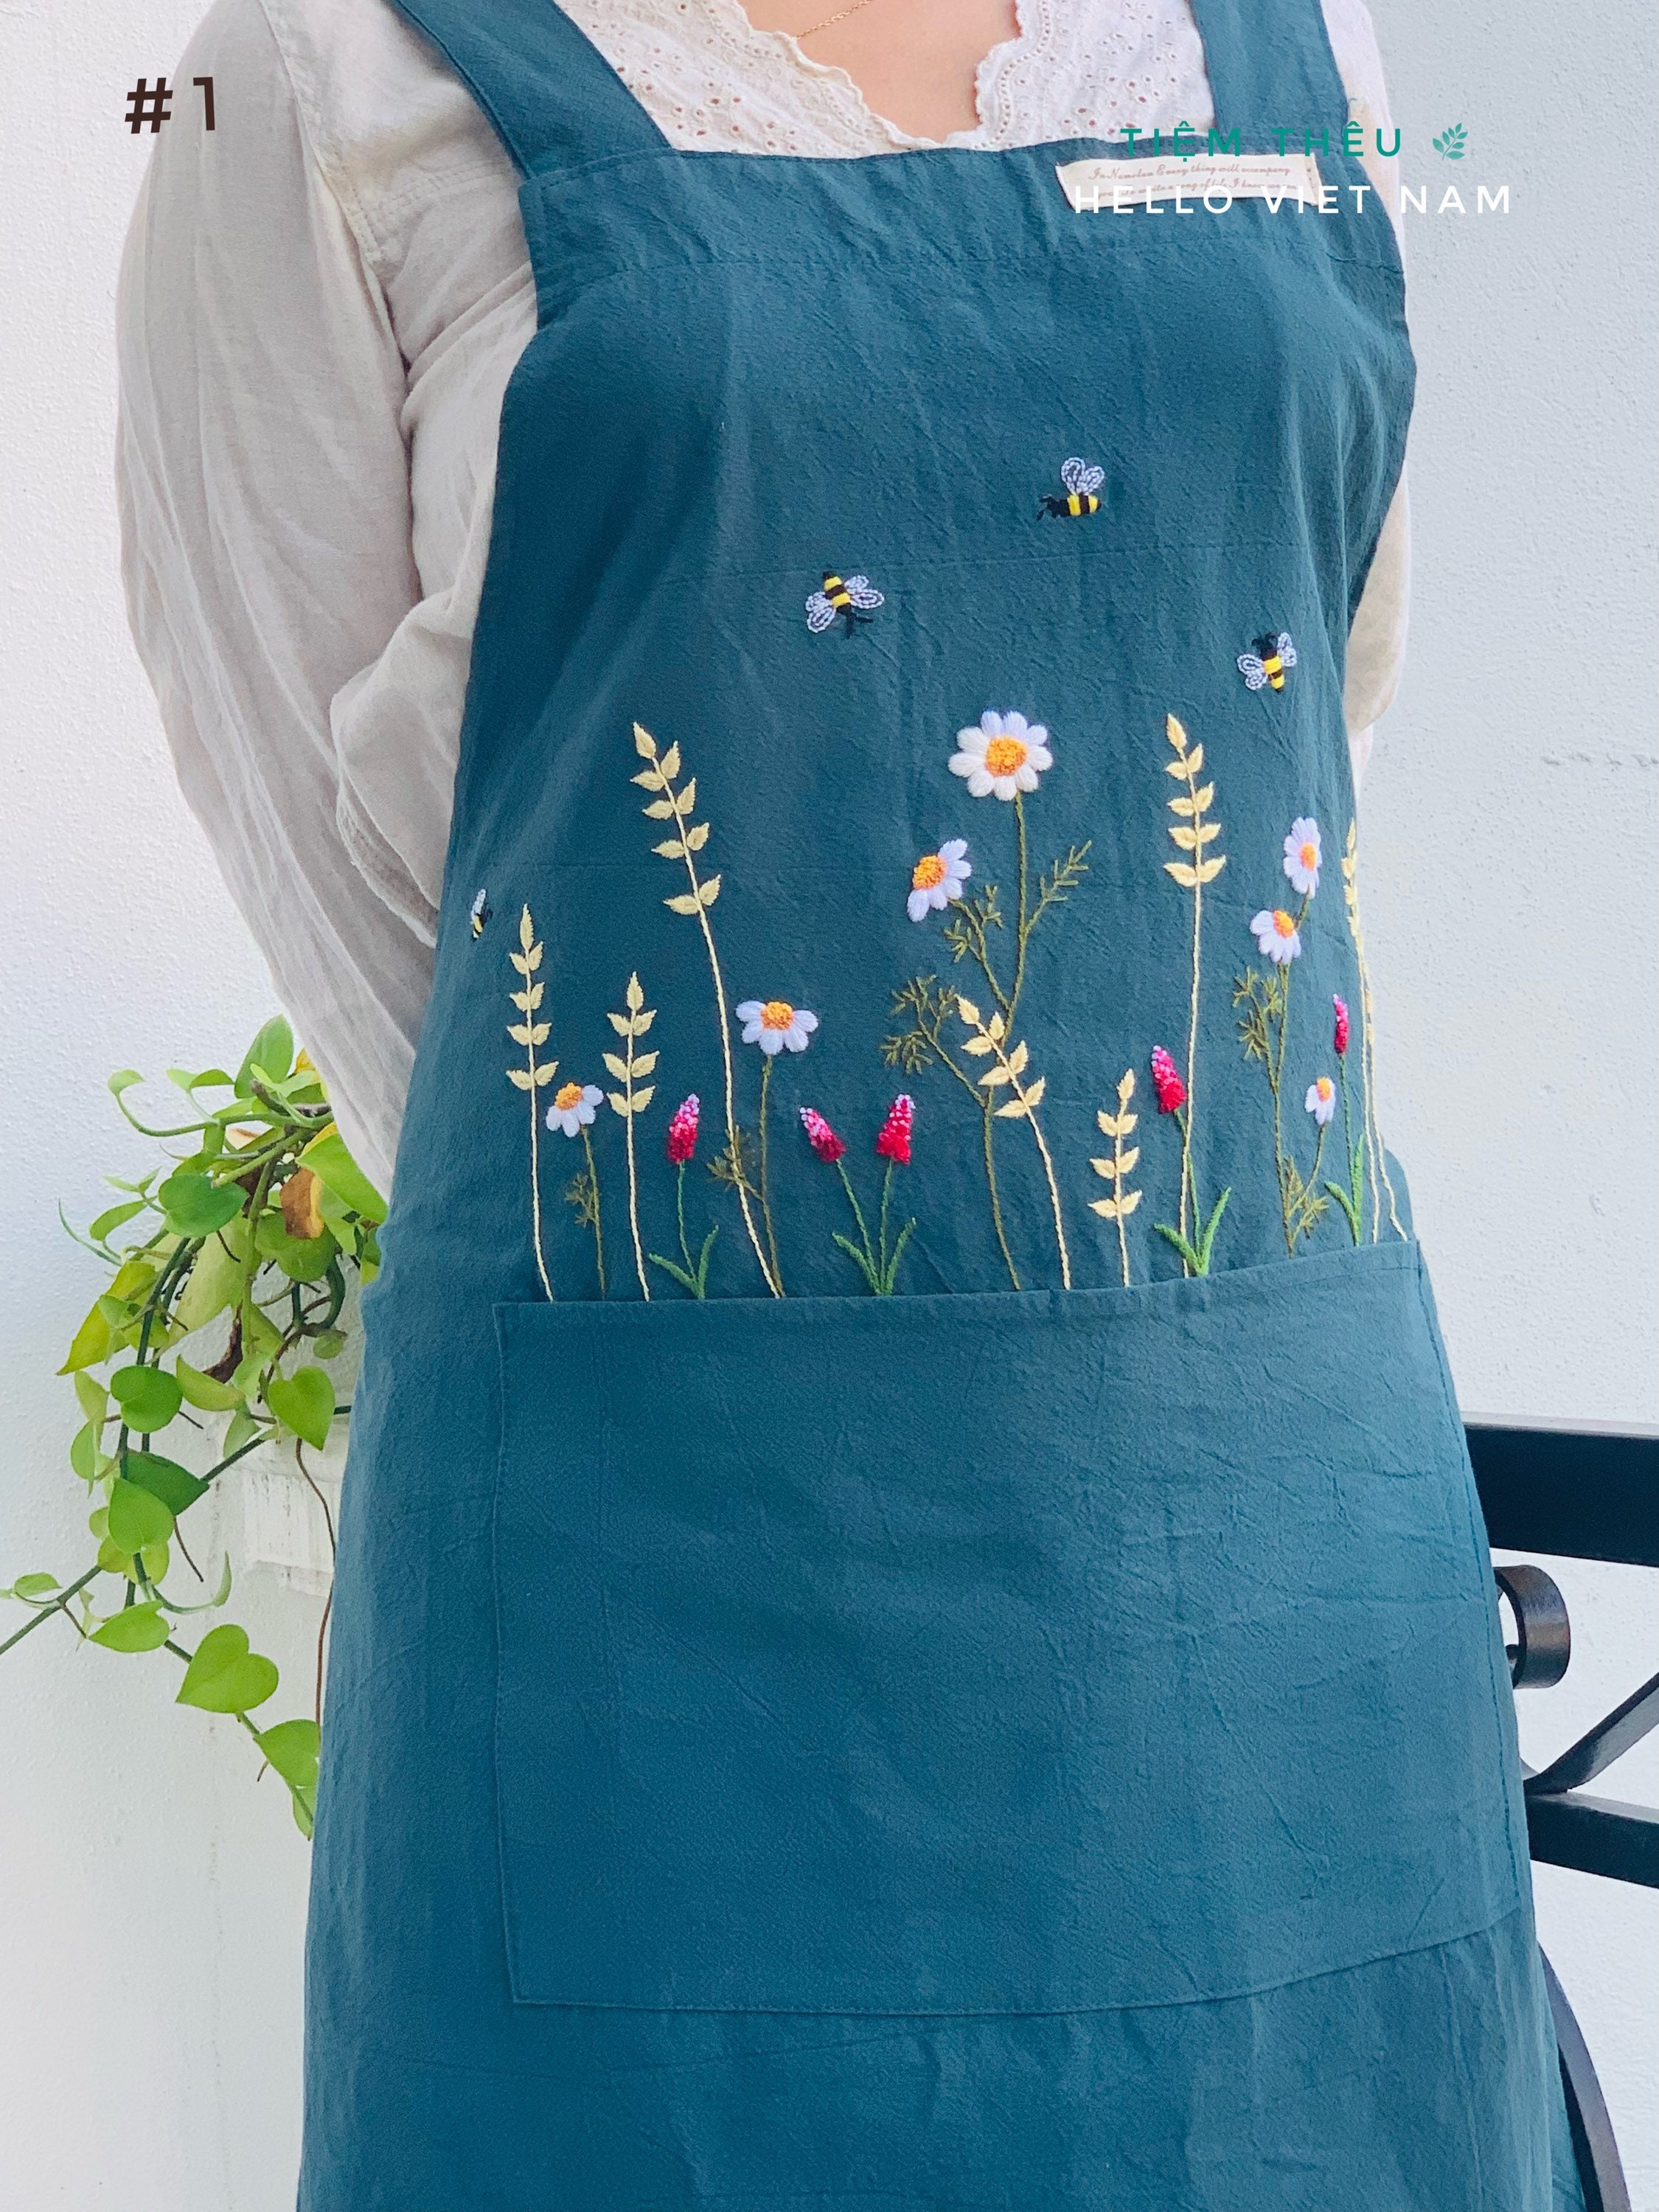 Buy Personalized Apron for Women Embroidered Apron Green Colour ...